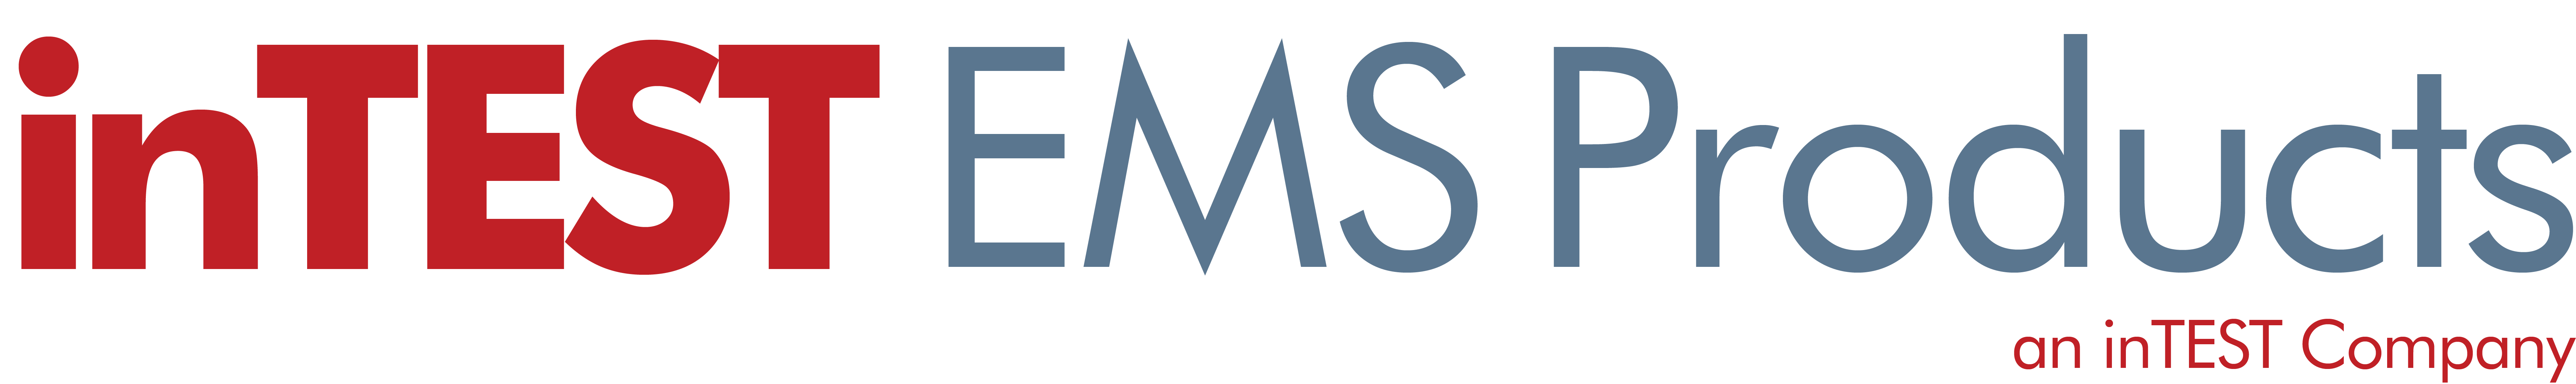 inTEST EMS Products Logo